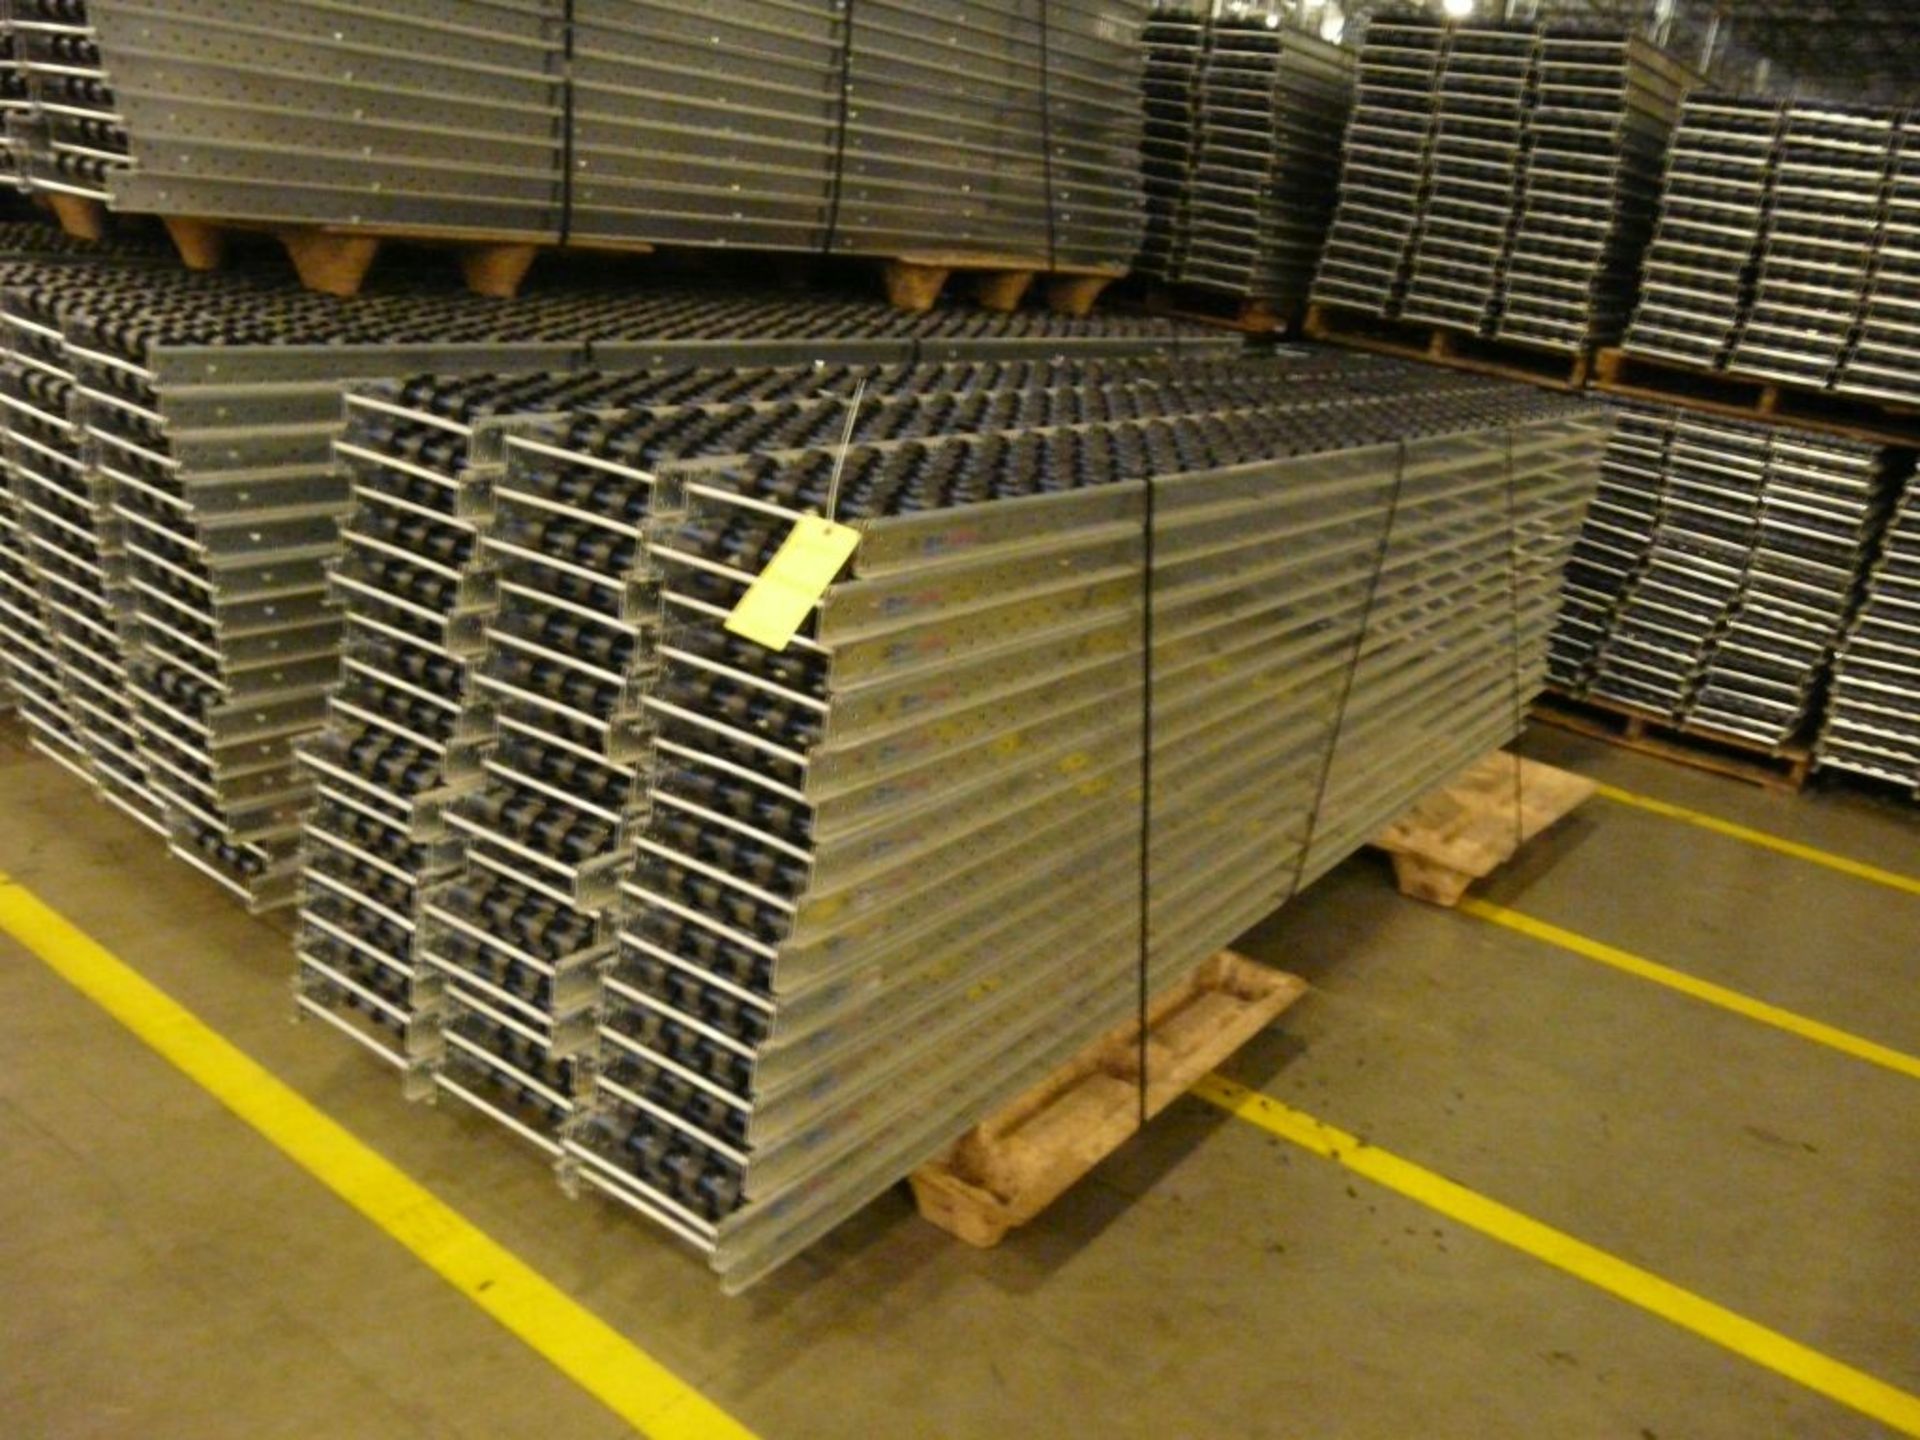 Lot of (90) SpanTrack Wheelbed Carton Flow Conveyors - 11.5'L x 11"W; Tag: 223555 - $30 Lot